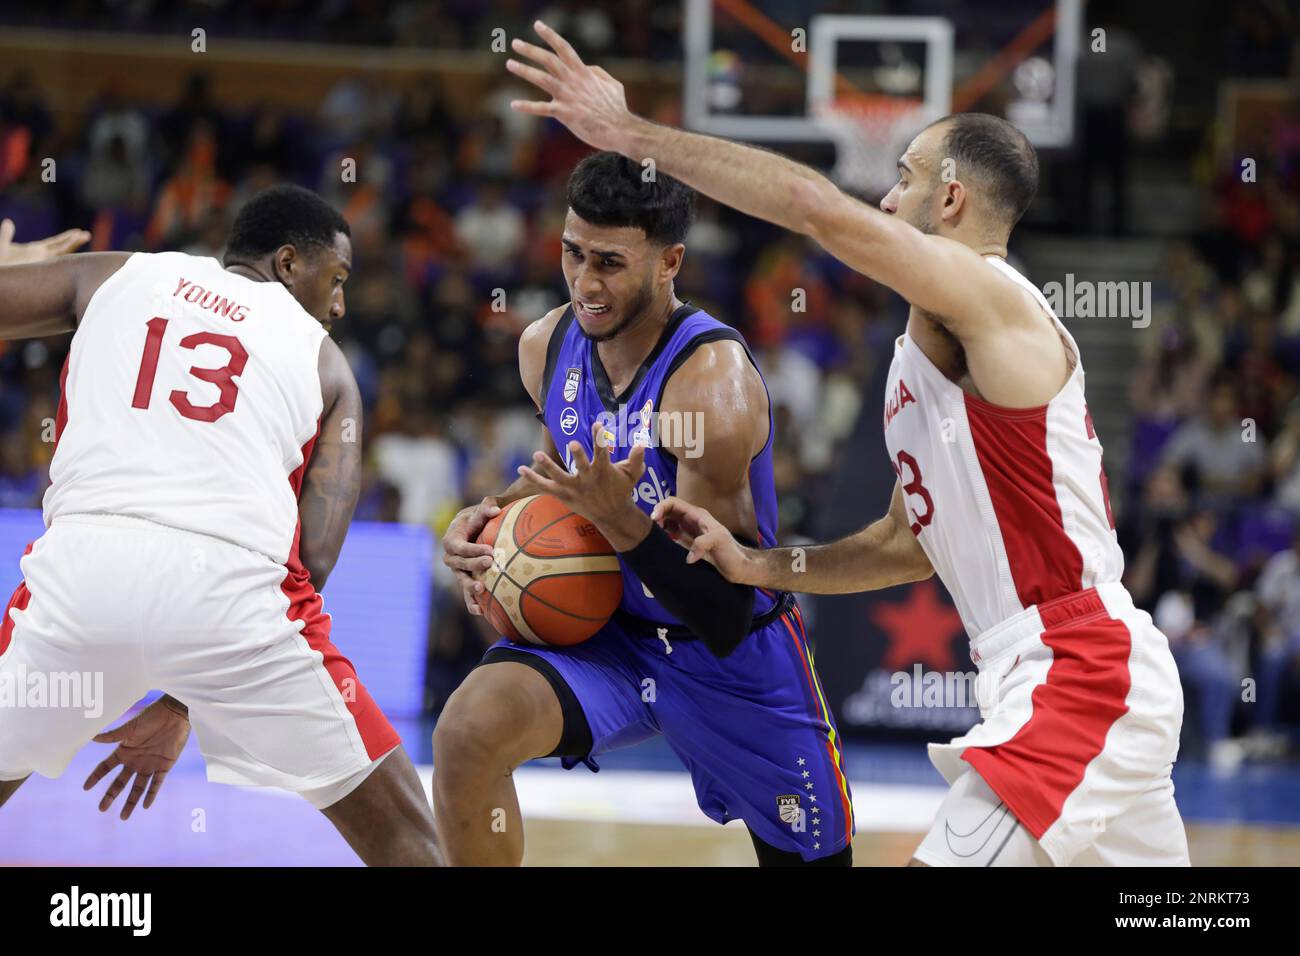 CARACAS, VENEZUELA - FEBRUARY 26: Garly Sojo of Venezuela competes for the ball with Phil Scrubb of Canada during the FIBA ​​Basketball World Cup 2023 Americas Qualifiers basketball game, Poliedro de Caracas, in Caracas, Venezuela, on February 26, 2023. (Photo by Pedro Rances Mattey/Pximages) Credit: Px Images/Alamy Live News Stock Photo